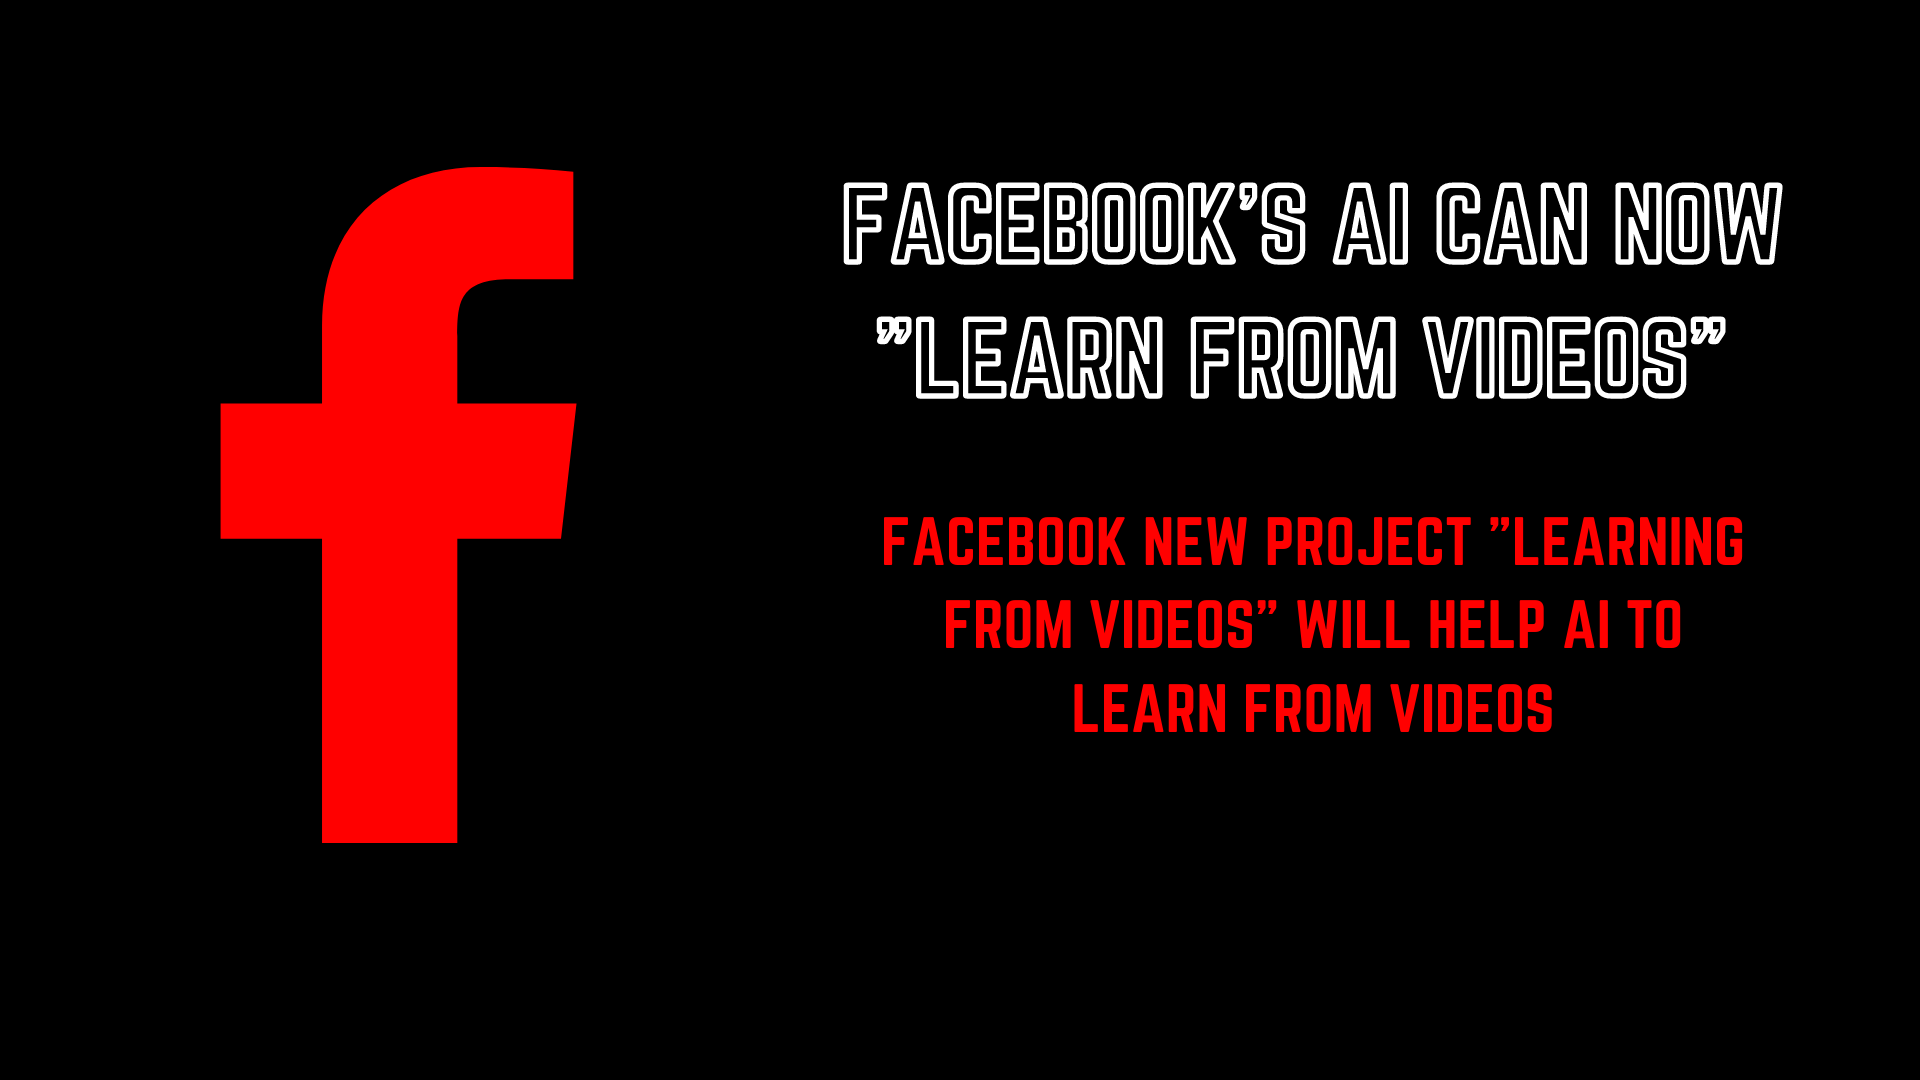 Facebook new project helps AI to learn form videos